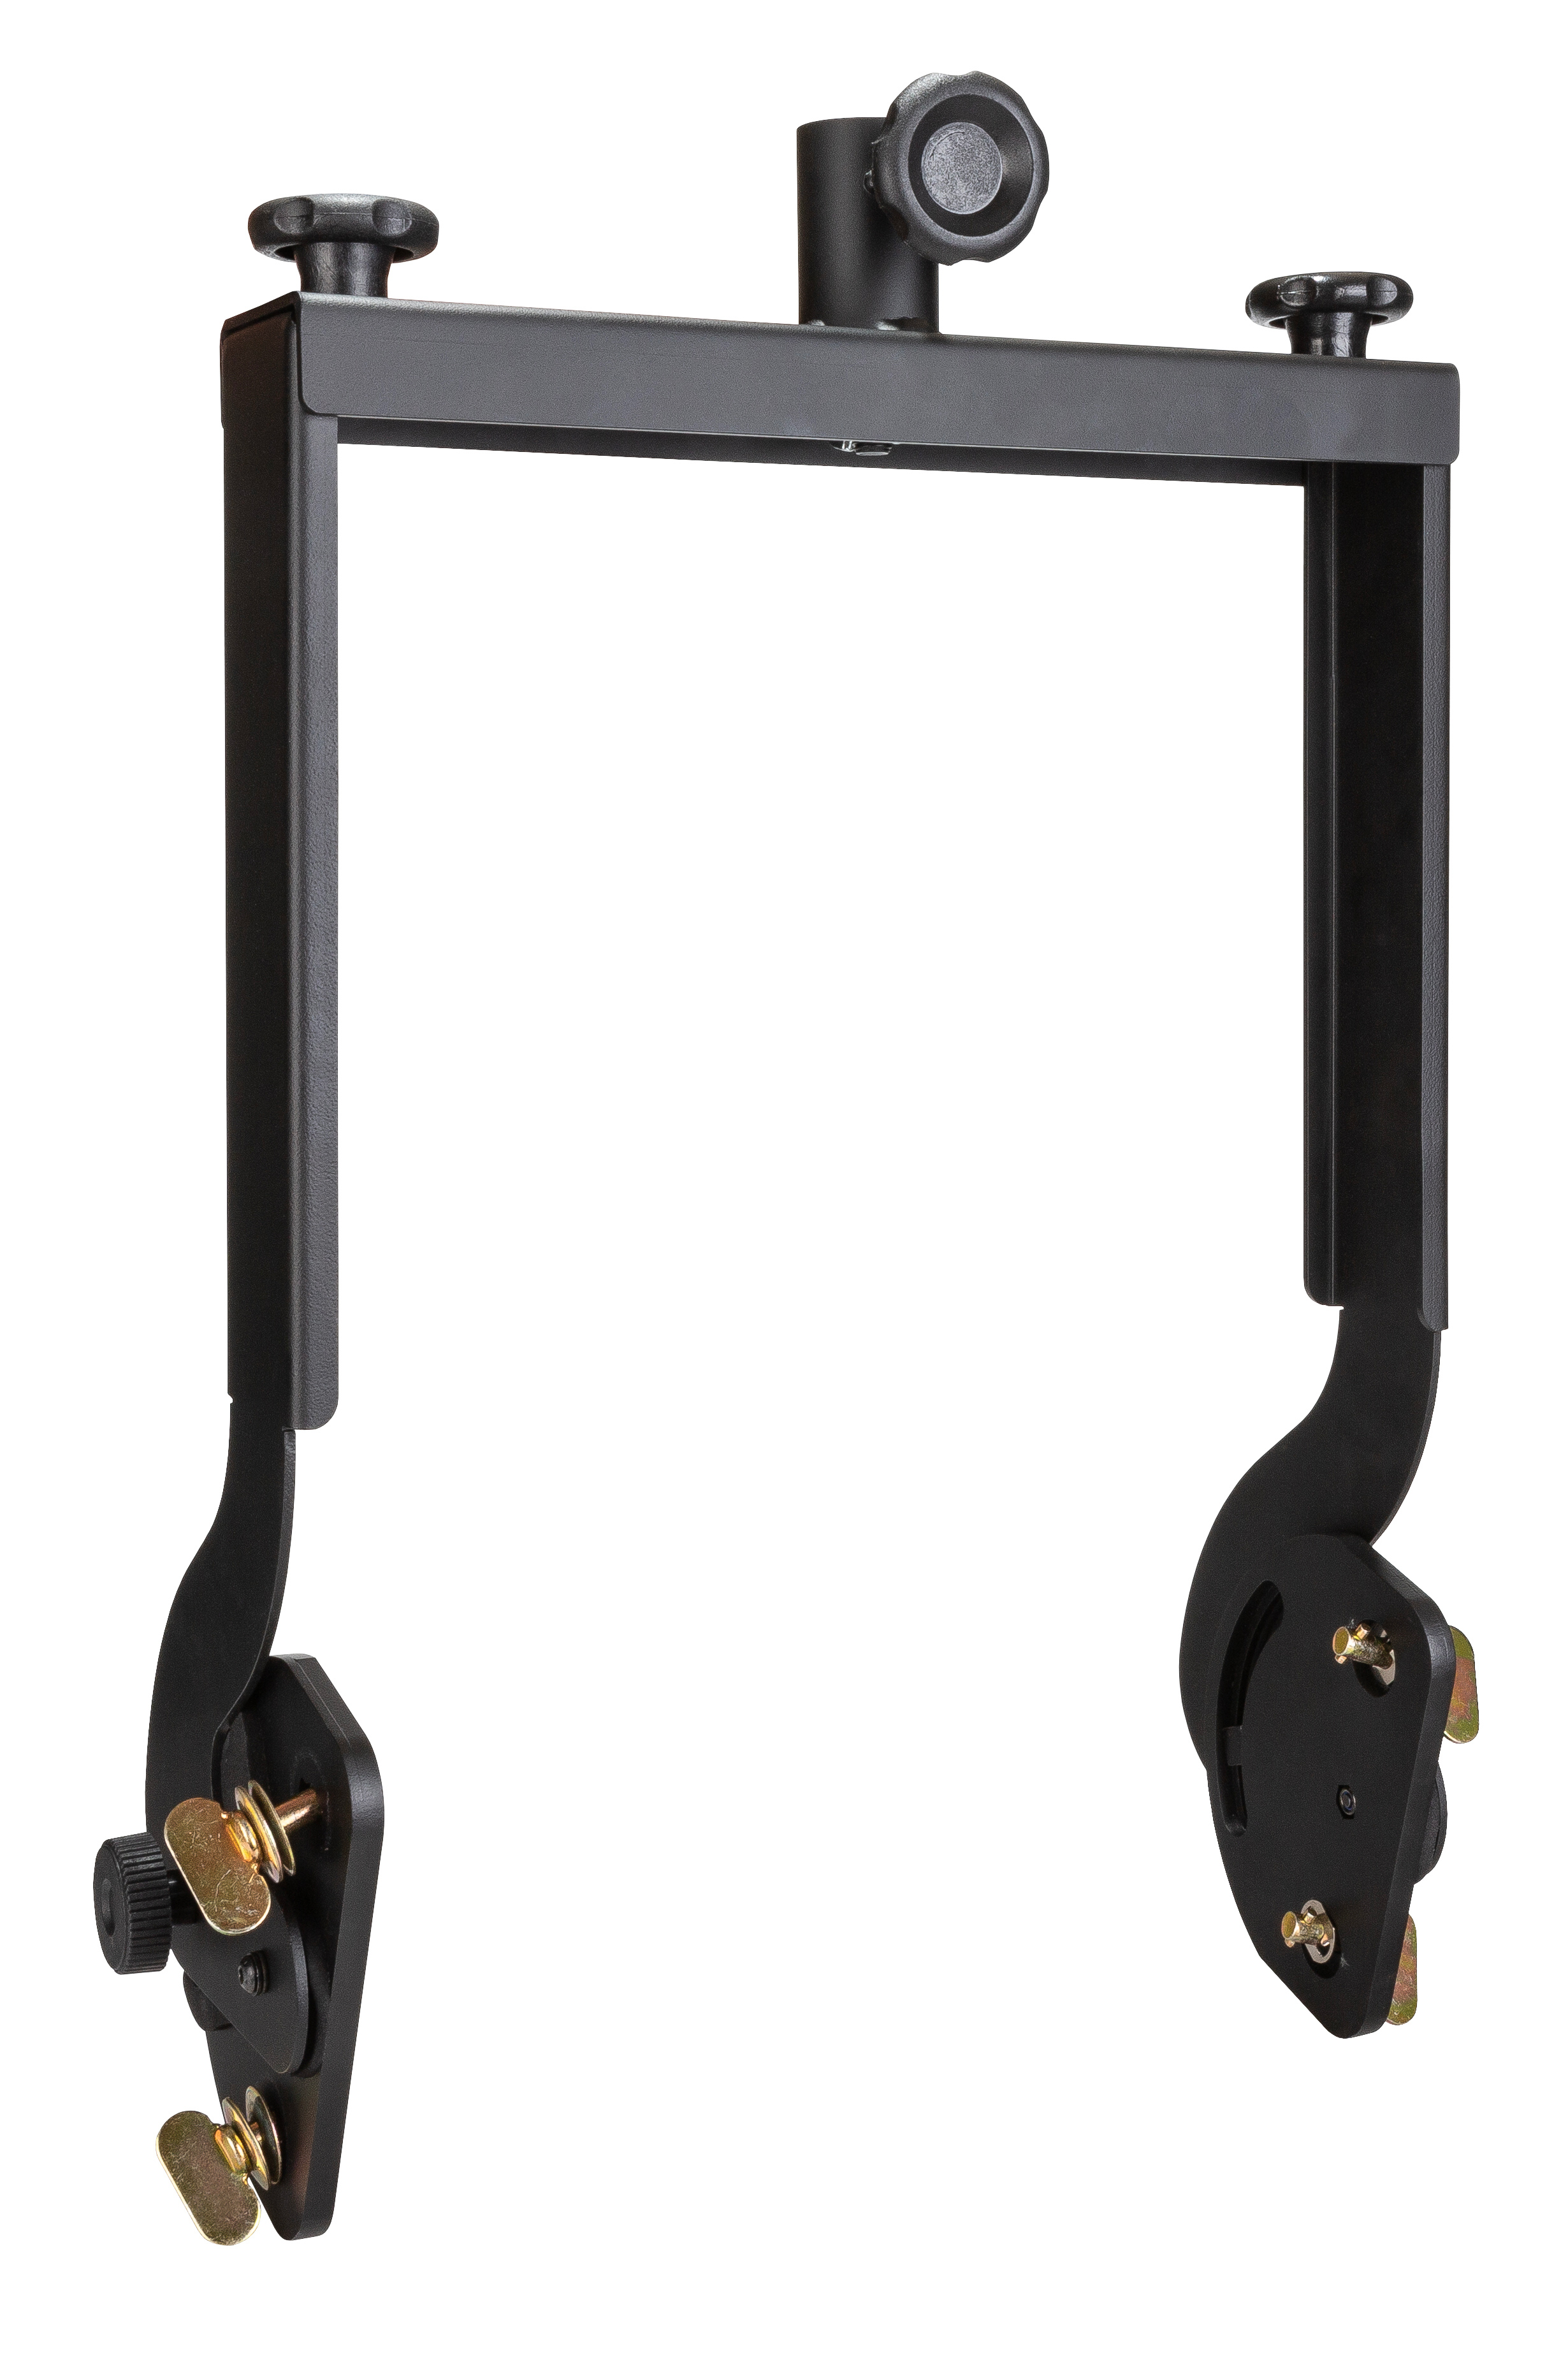 Special quick-mount U-bracket for SQT-210: designed for easy truss + speaker stand mounting with PAN/TILT capability